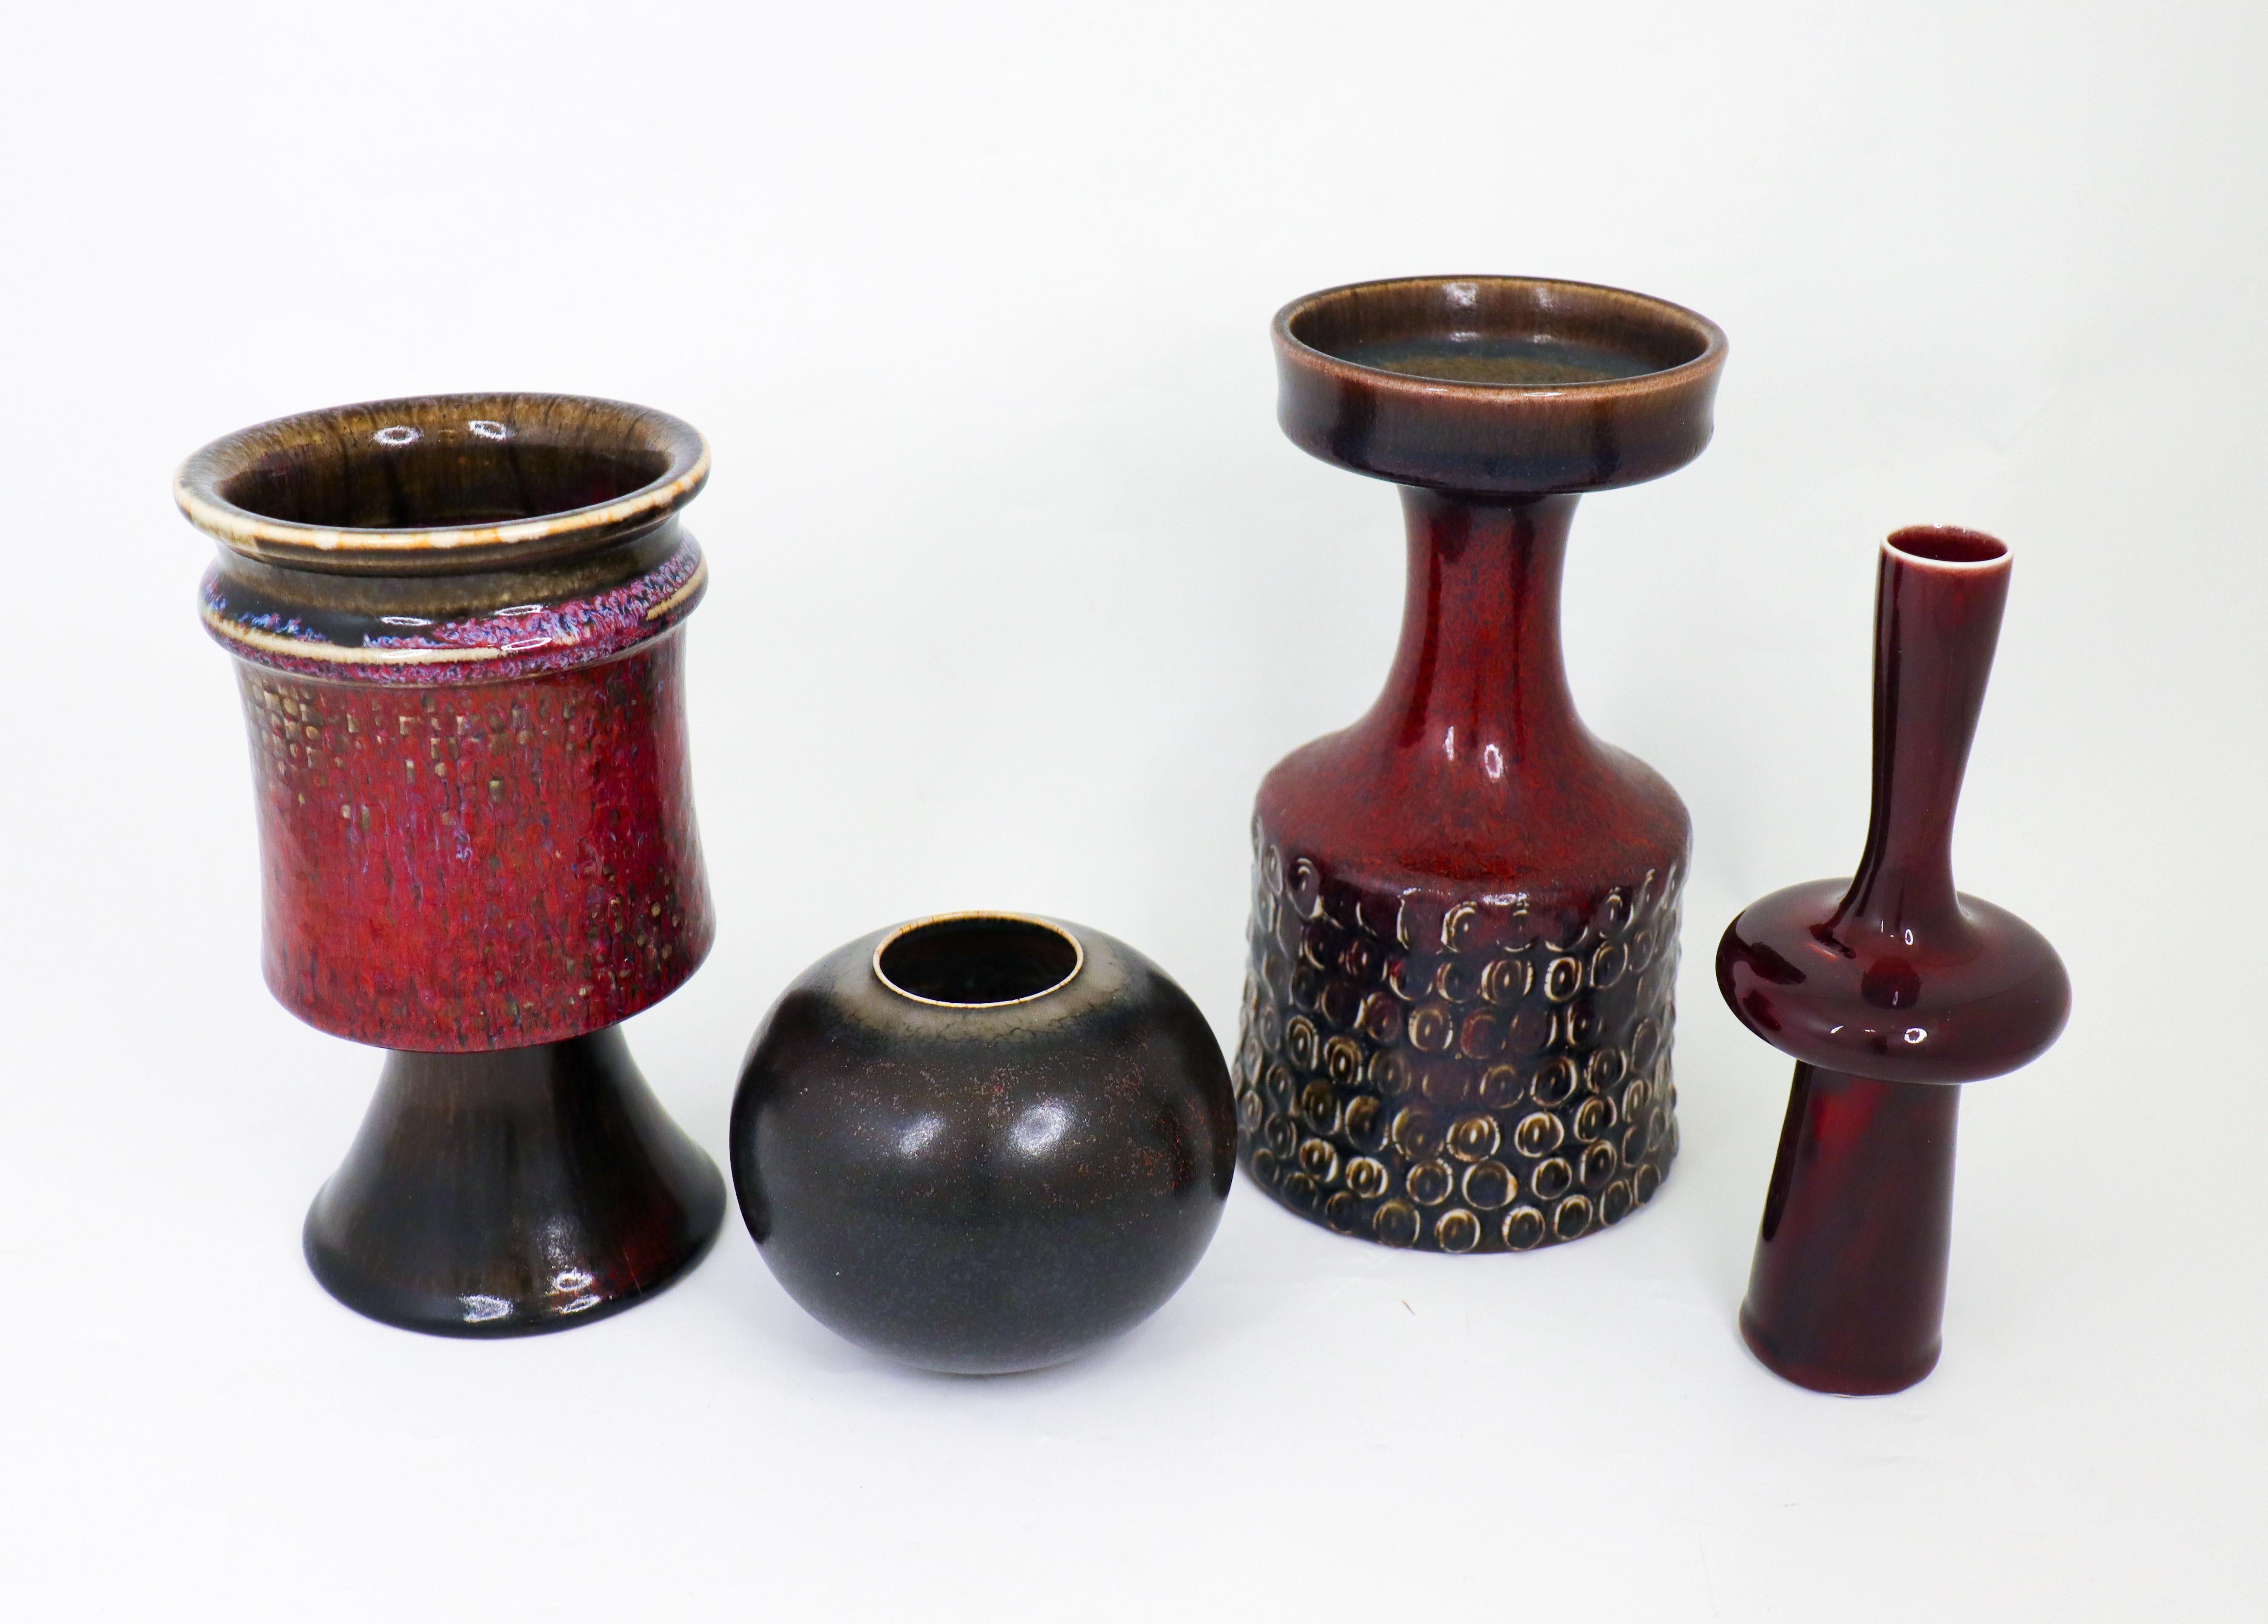 A group of four vases designed by Stig Lindberg at Gustavsberg in the 1950s. The vases are between 9.5 - 20.5 cm high and in excellent condition. They are all marked as 1st quality. 

Carl-Harry Stålhane is one of the top names when it comes to